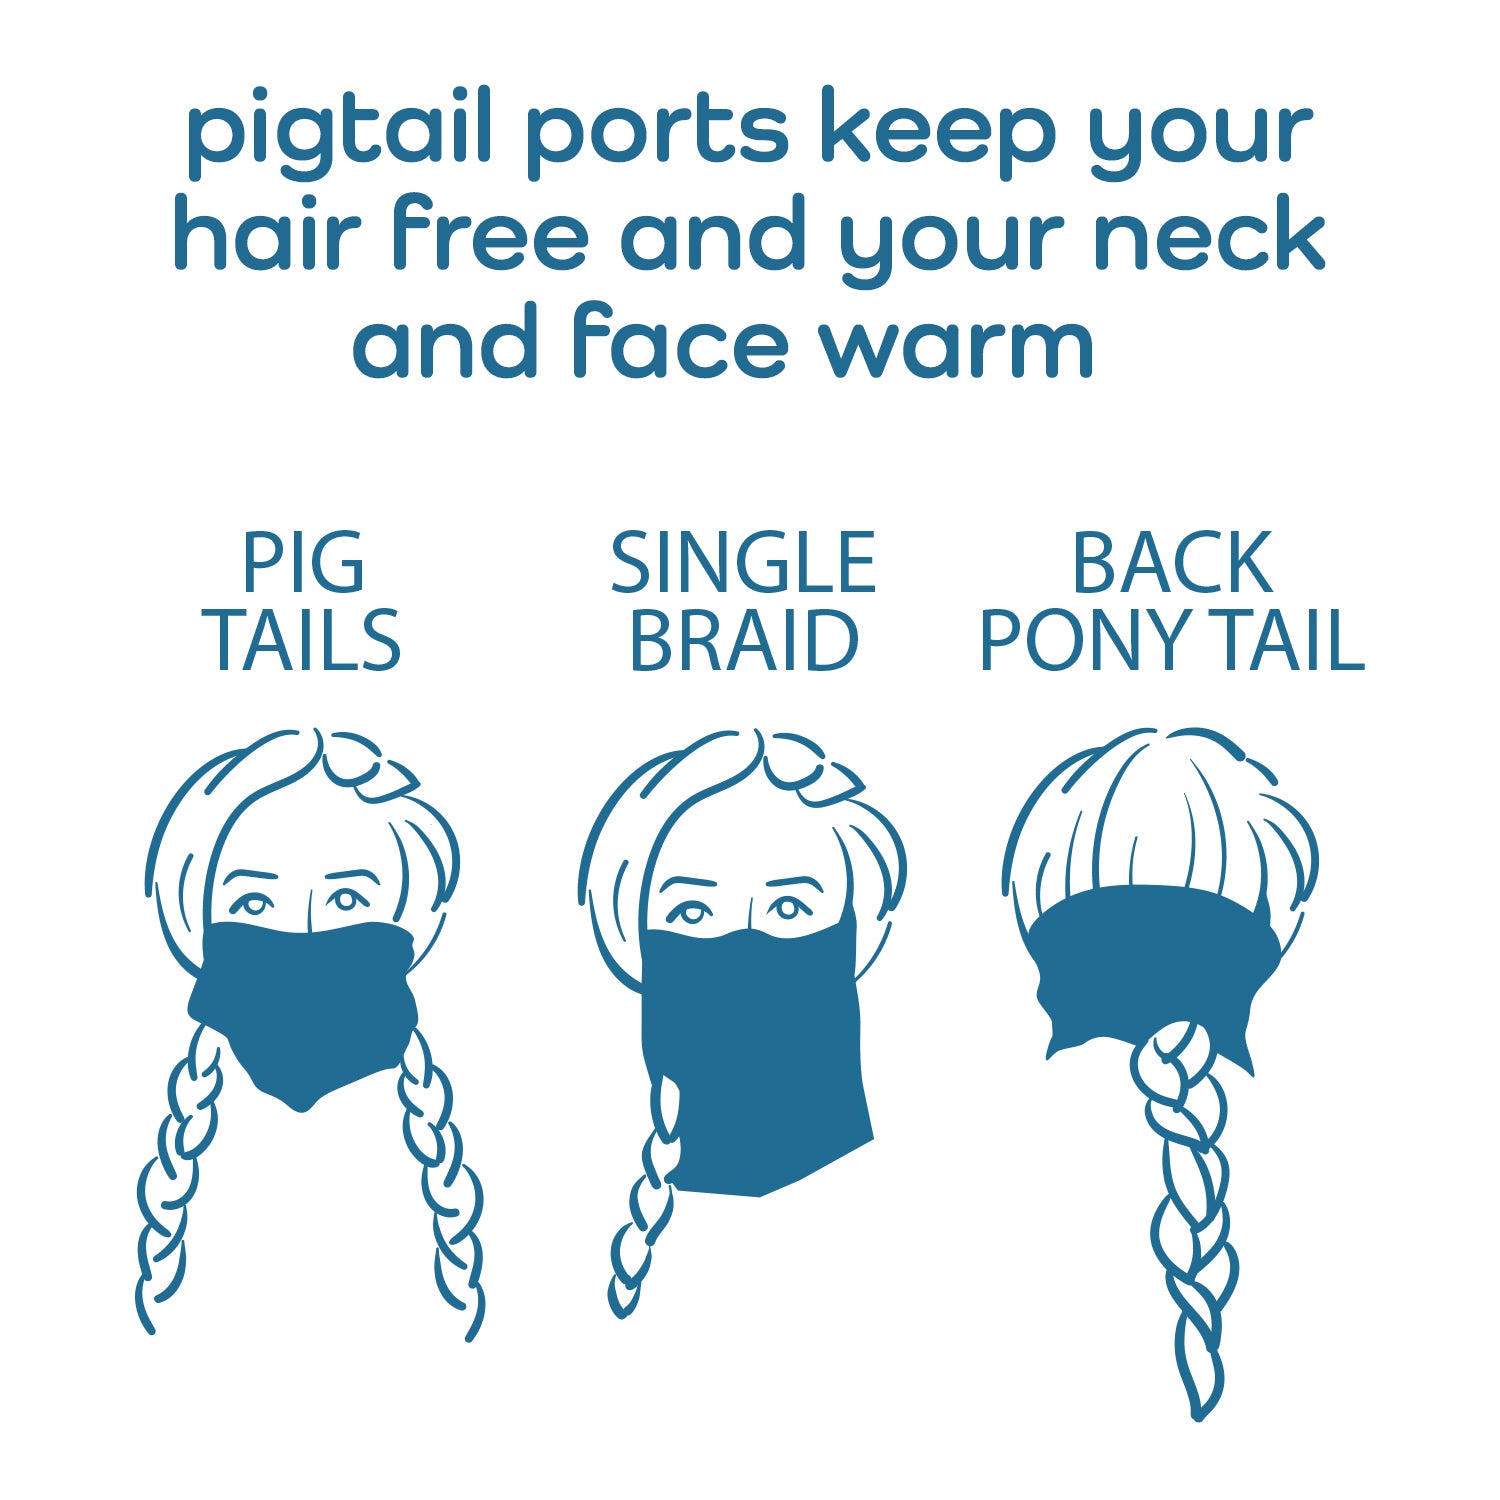 Rapunzel Fleece Lined Neck Gaiter (patent pending pigtail ports for people with long hair!) - 3 Colors!